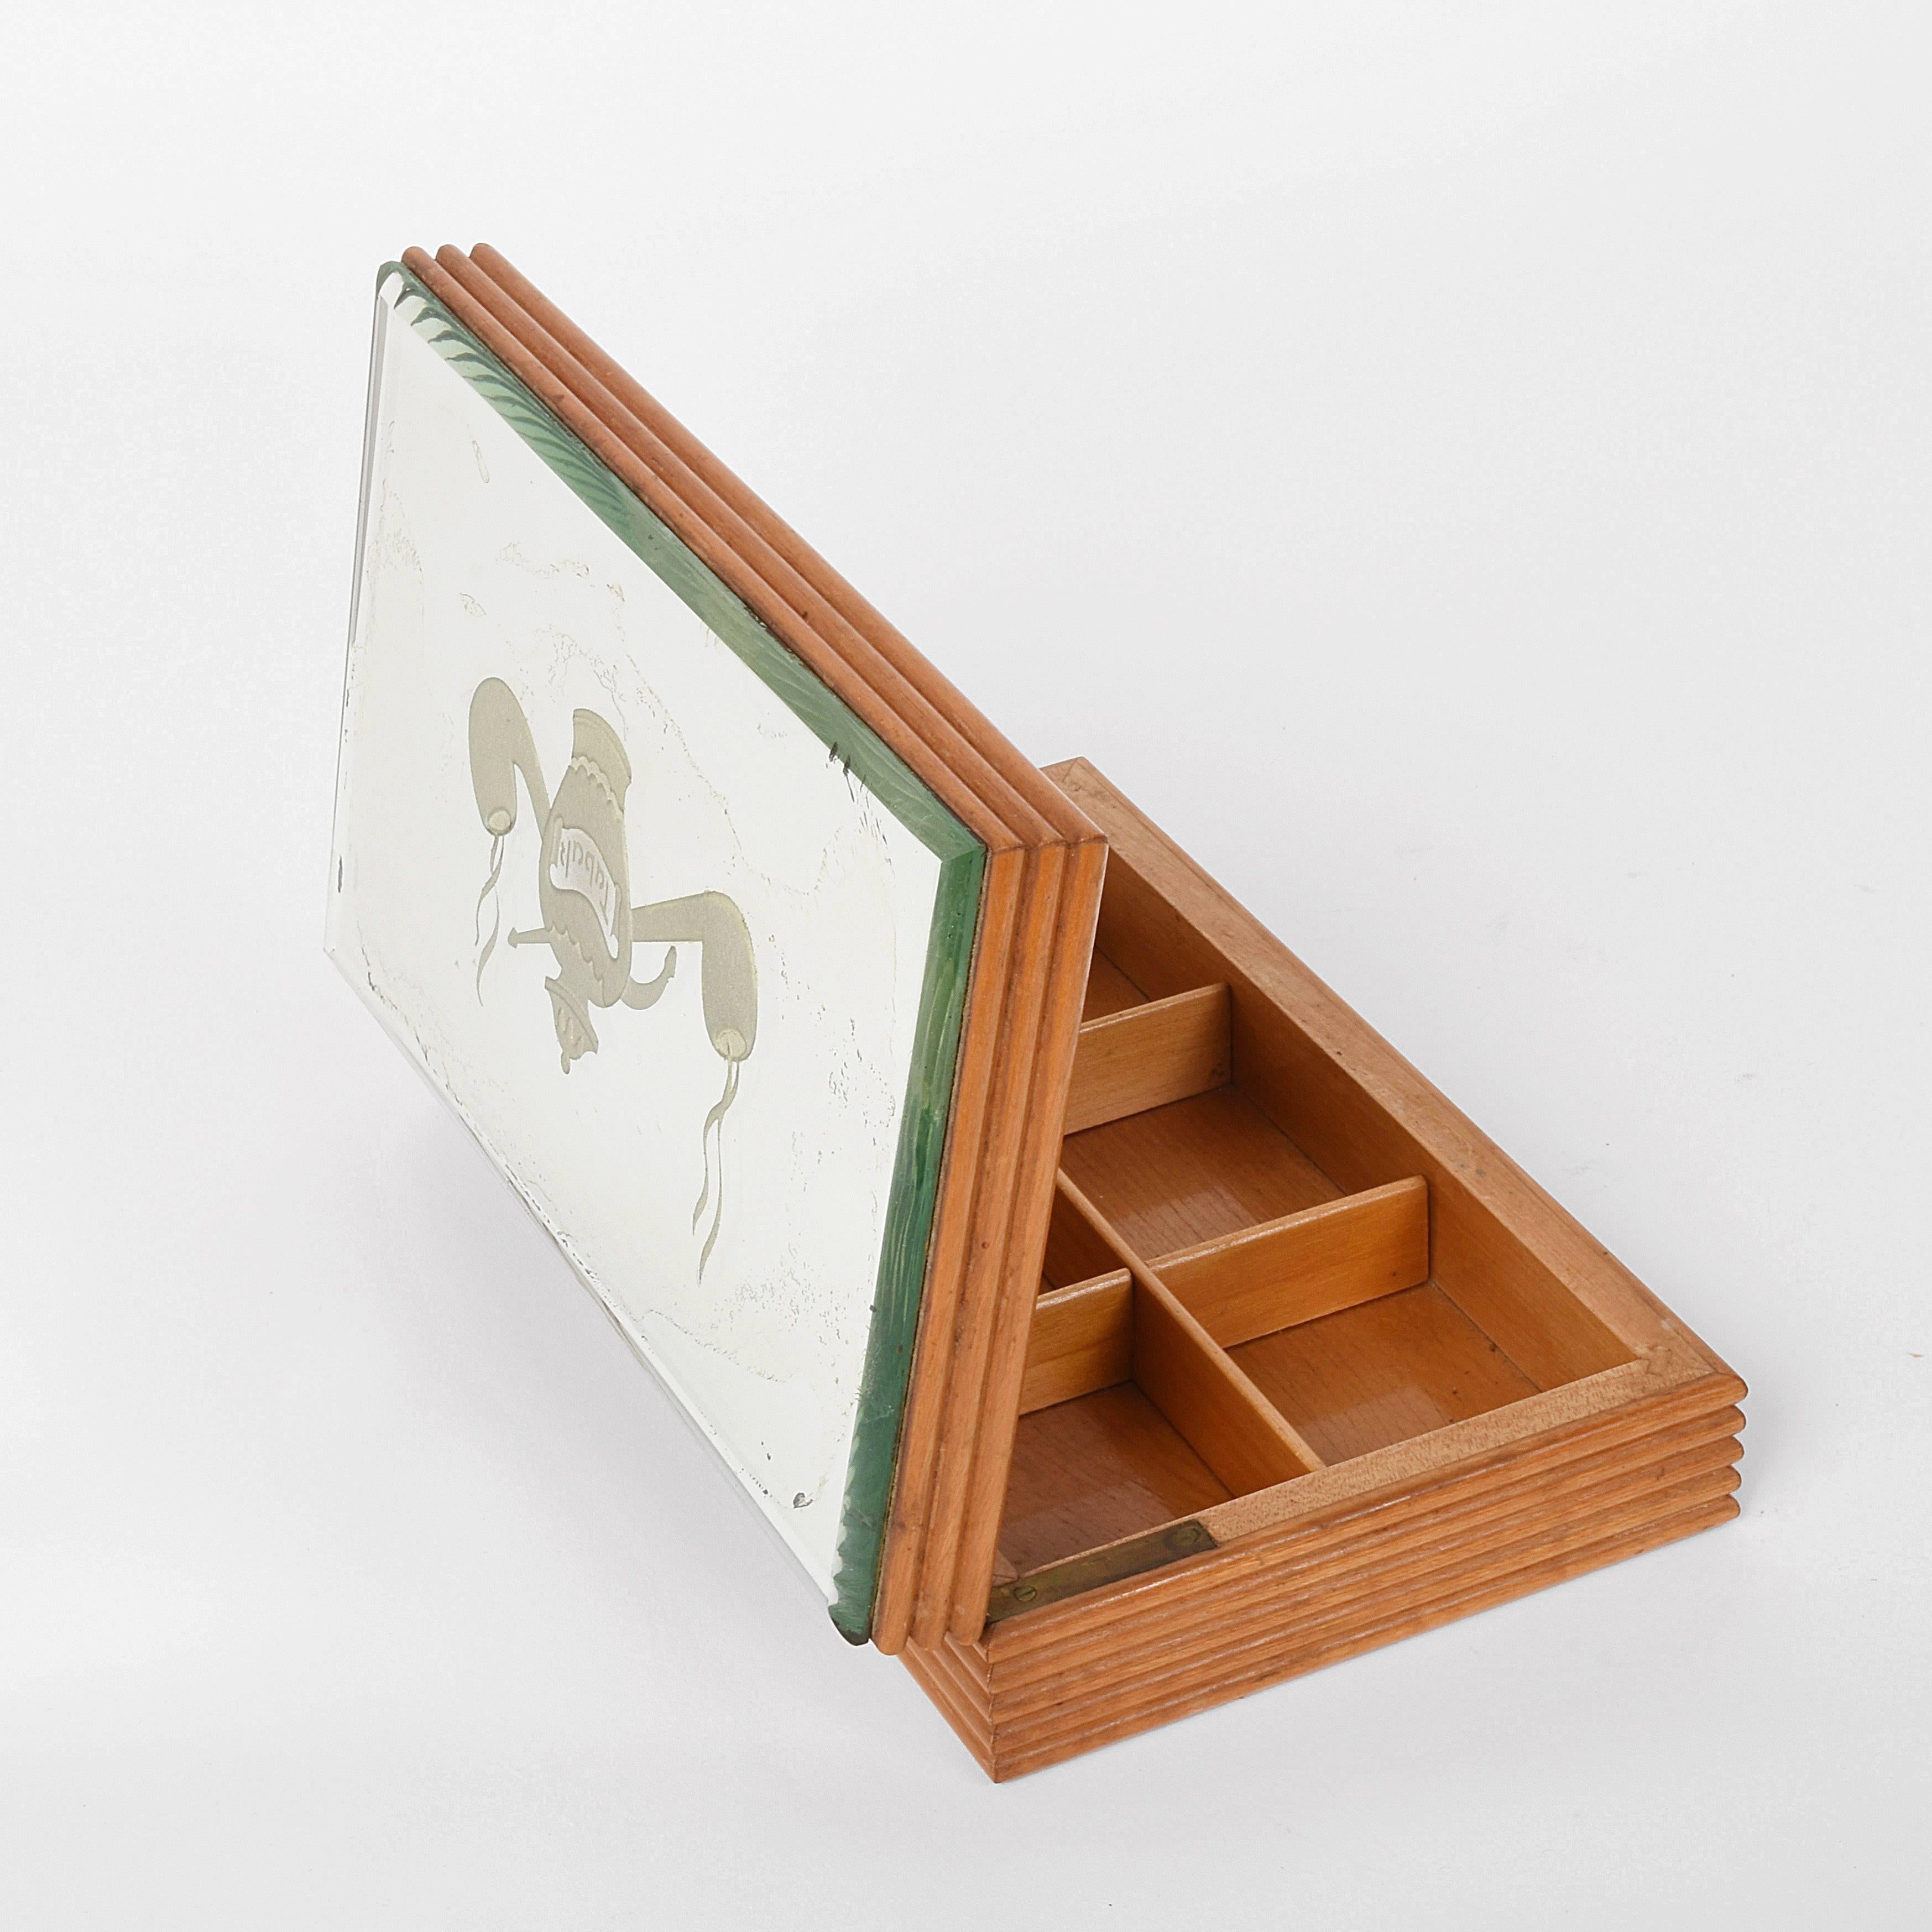 Art Deco Wooden Box with Mirror Top Tobacco Holder, 1940 In Good Condition For Sale In Roma, IT